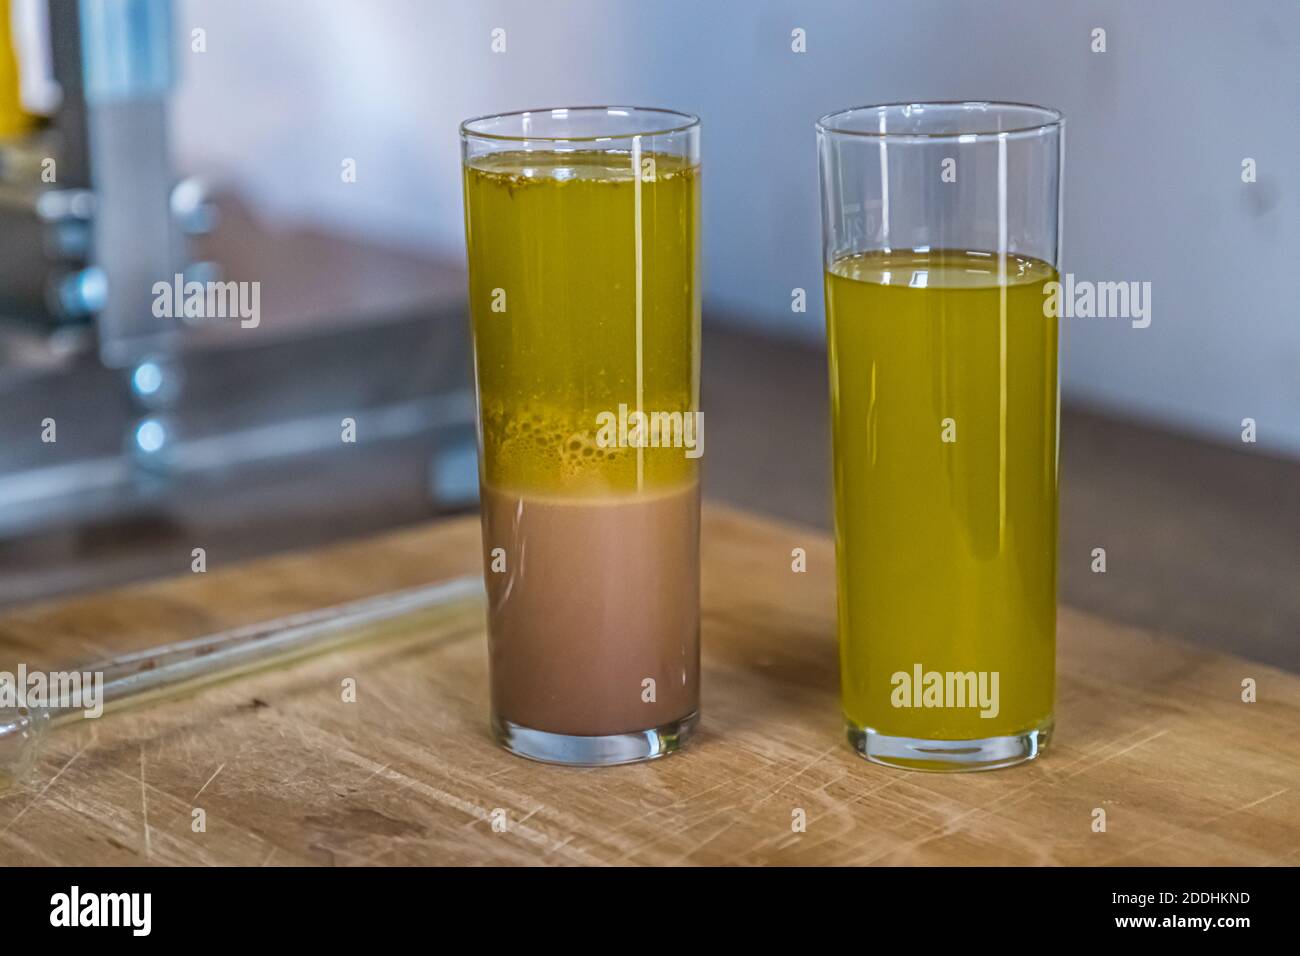 https://c8.alamy.com/comp/2DDHKND/northernmost-olive-oil-production-in-pulheim-germany-an-aqueous-liquid-settles-in-the-pressed-juice-which-is-later-separated-from-the-oil-floating-on-top-koelsch-beer-glasses-serve-as-laboratory-containers-here-in-pulheim-2DDHKND.jpg